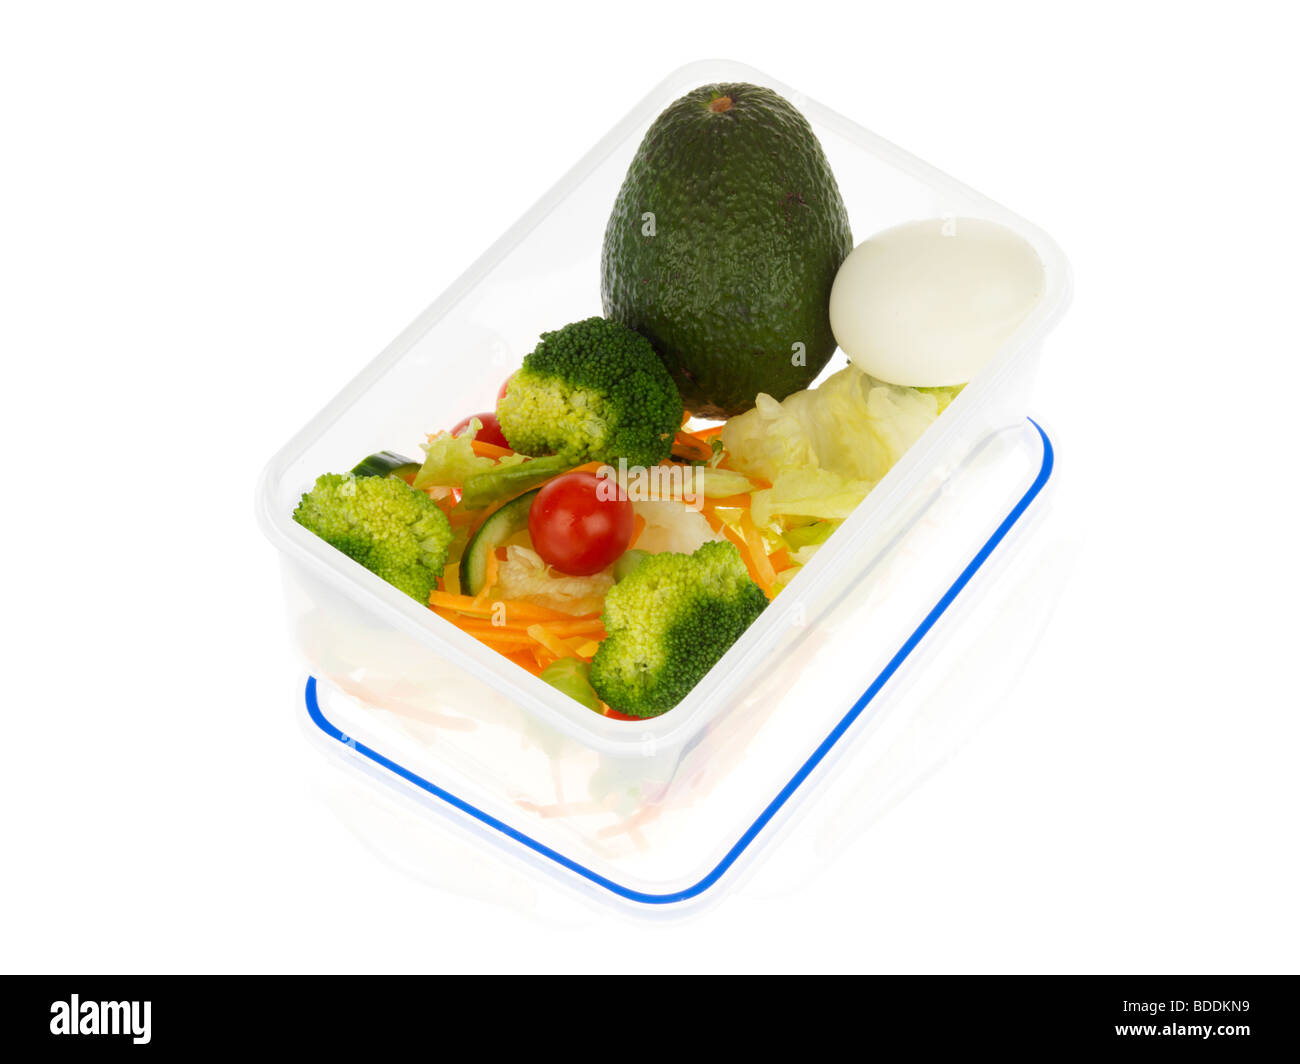 Vegetable Salad with Avacado and Boiled Egg Stock Photo